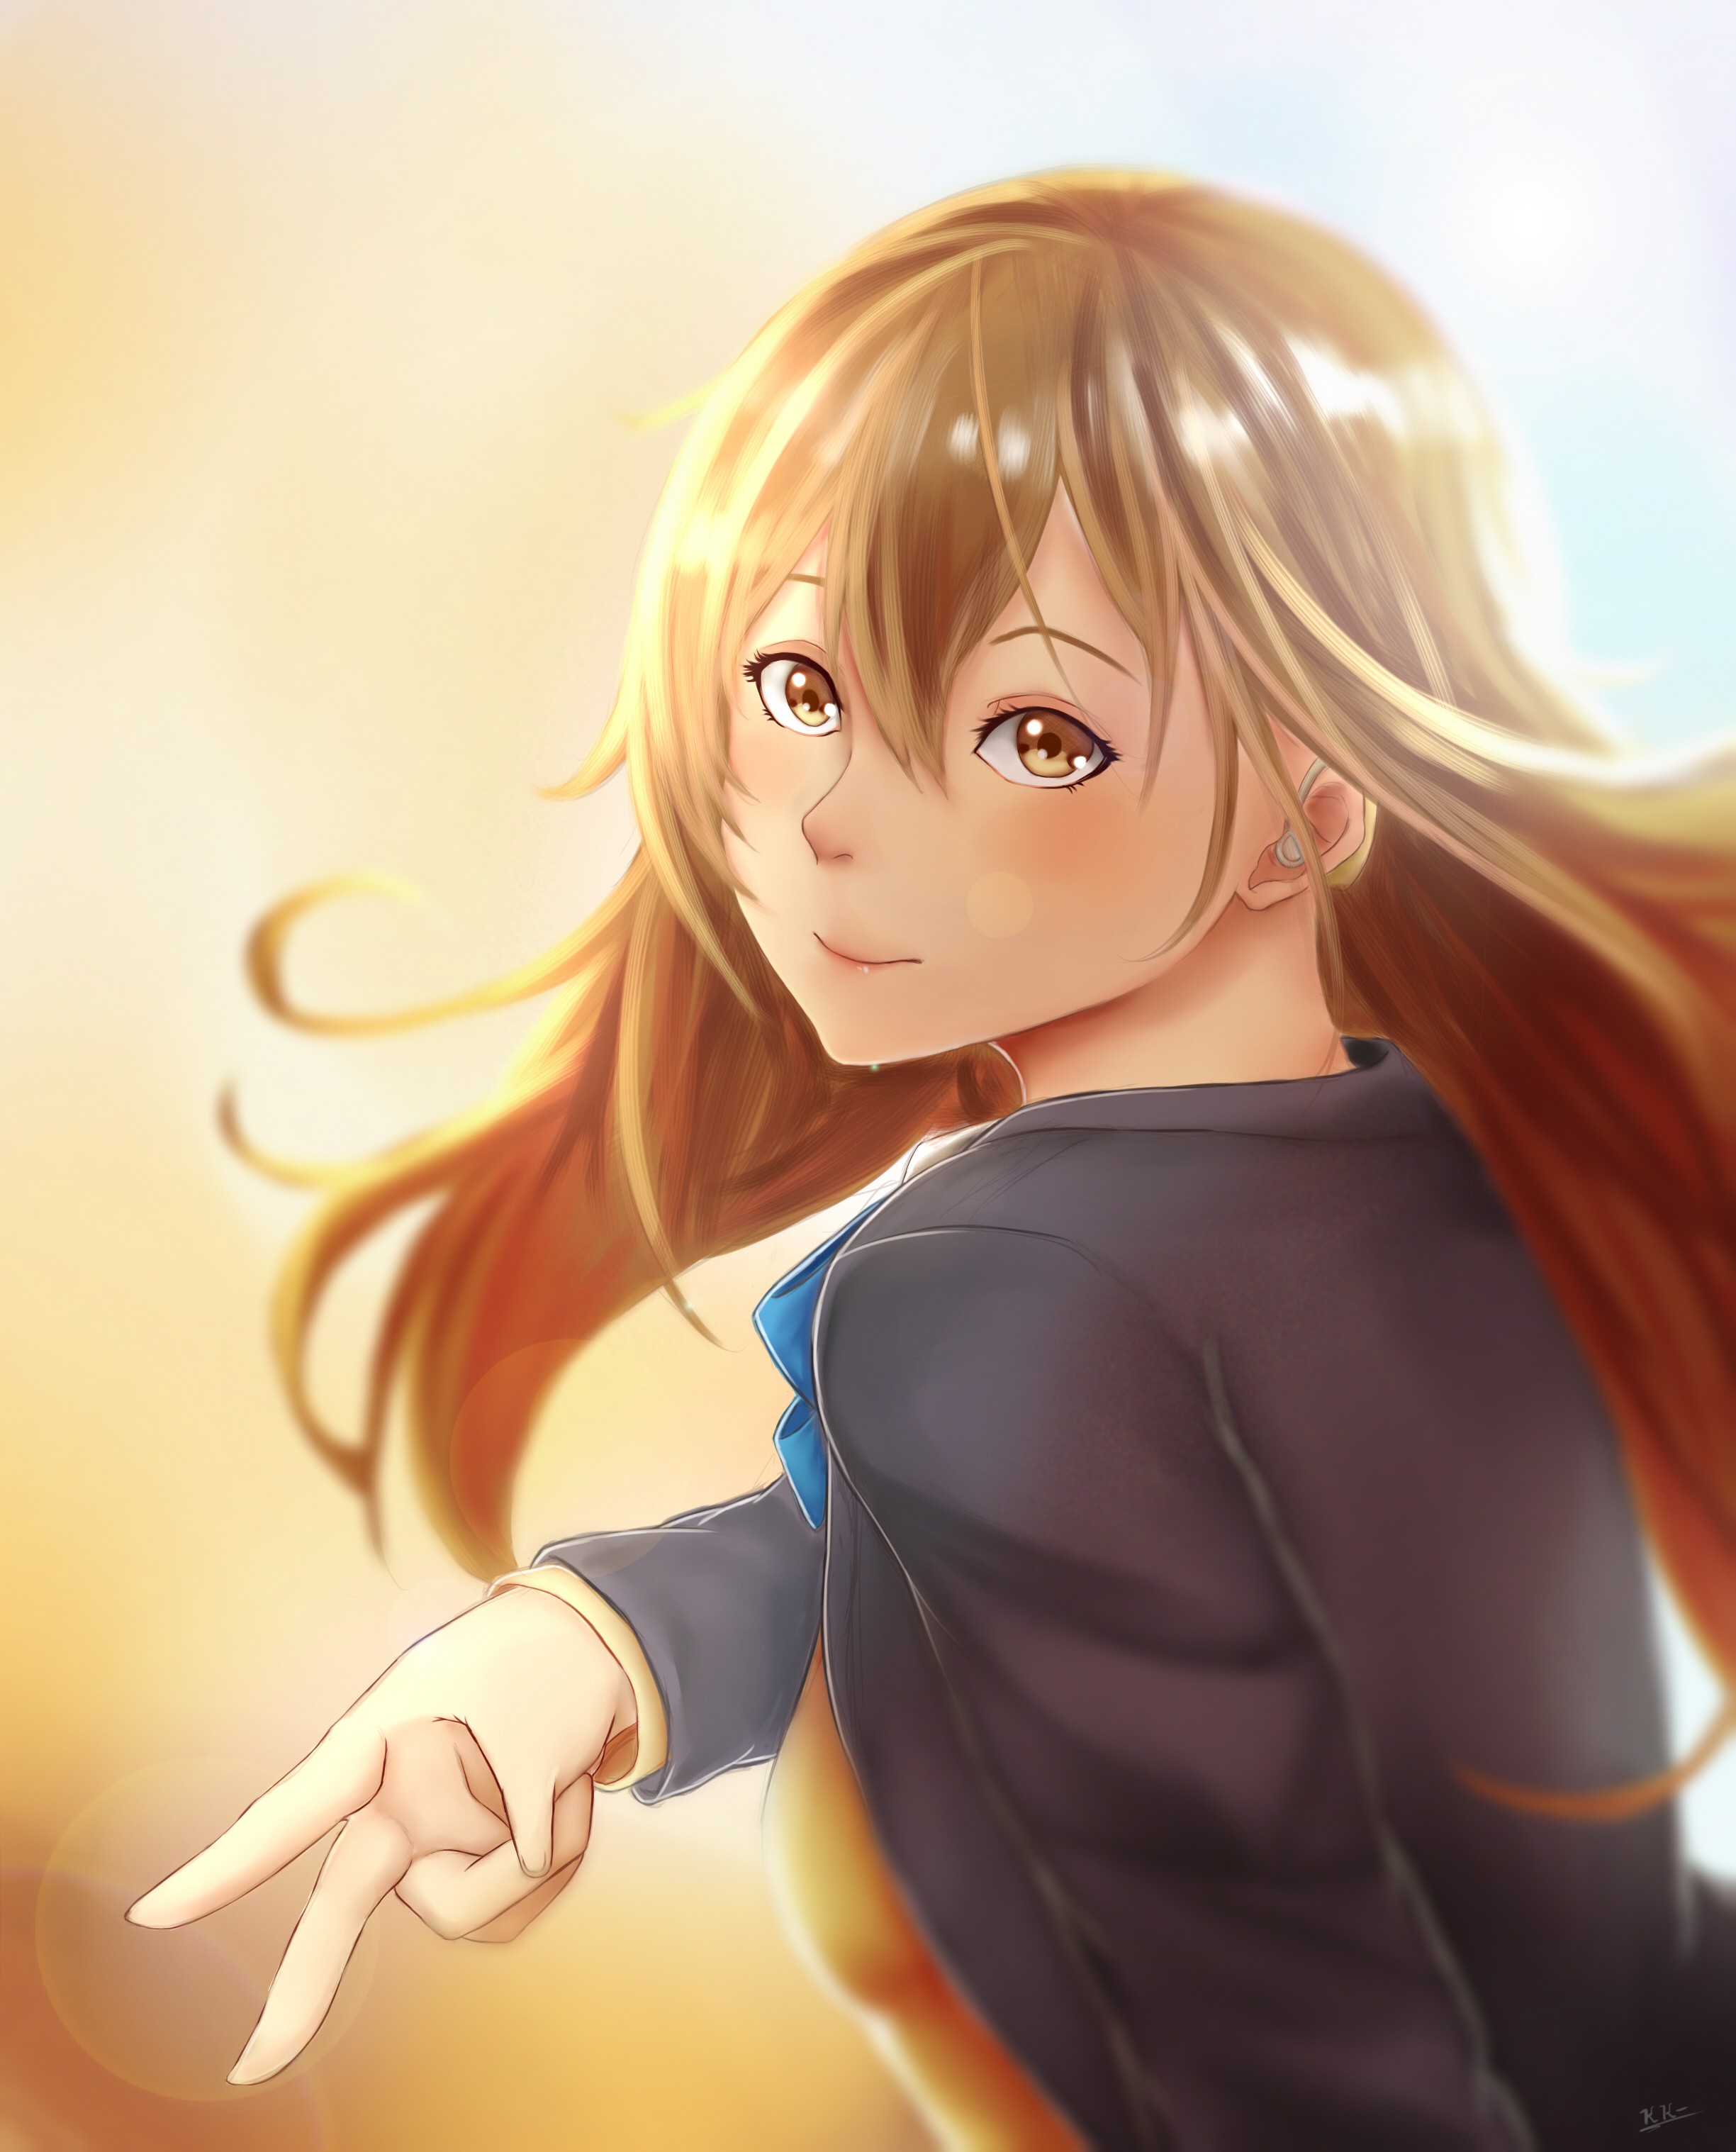 Anime 2449x3035 anime anime girls long hair brunette brown eyes looking at viewer simple background face hand gesture Pixiv women gradient